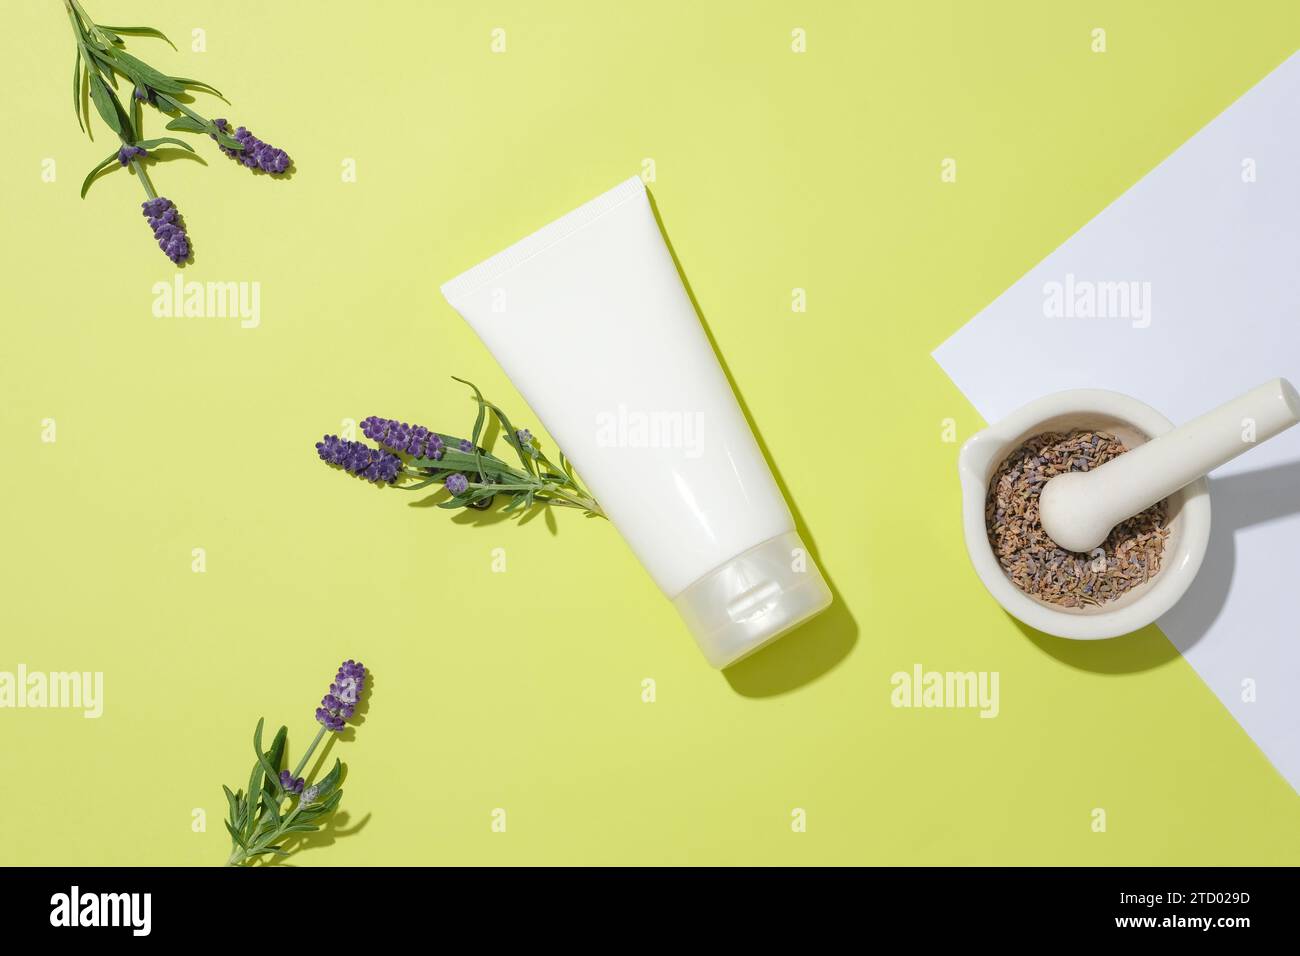 An unlabeled cosmetic tube is in the center of the frame, surrounded by decorations of lavender flowers and dried lavender buds inside a ceramic morta Stock Photo